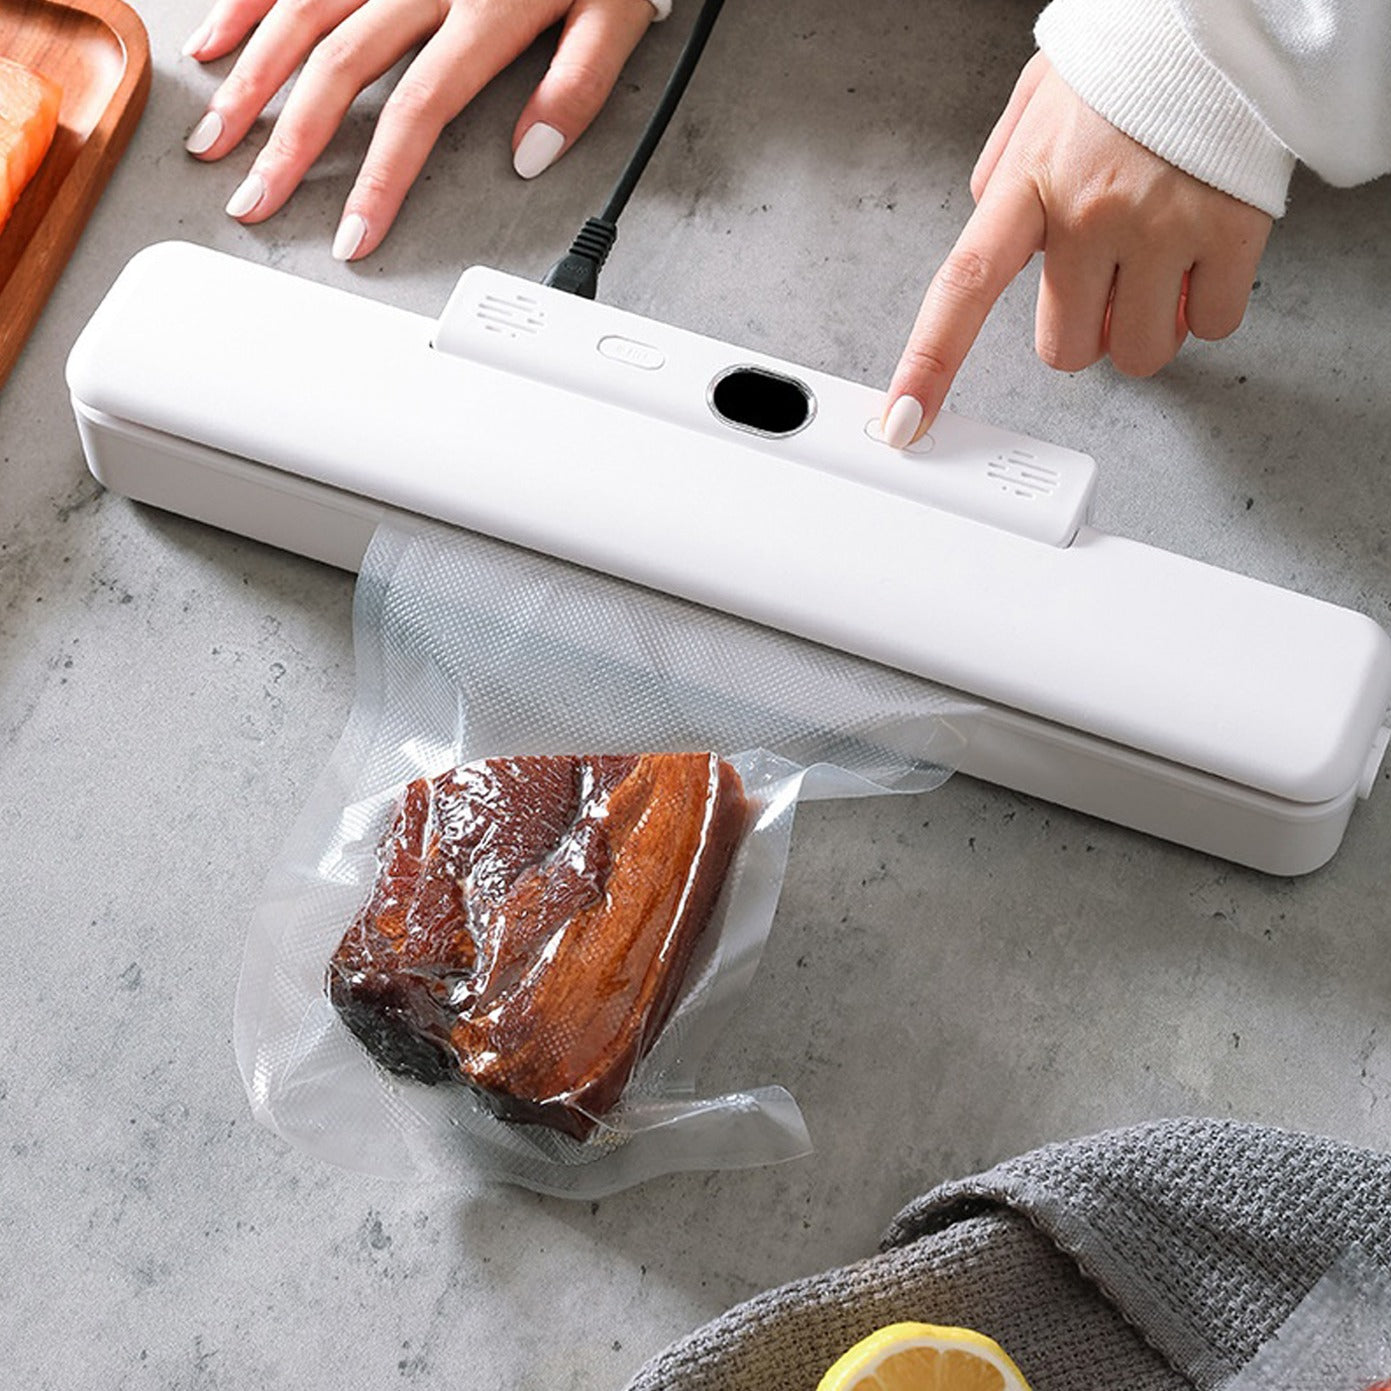 A person pressing the switch of the Automatic Food Vacuum Sealer